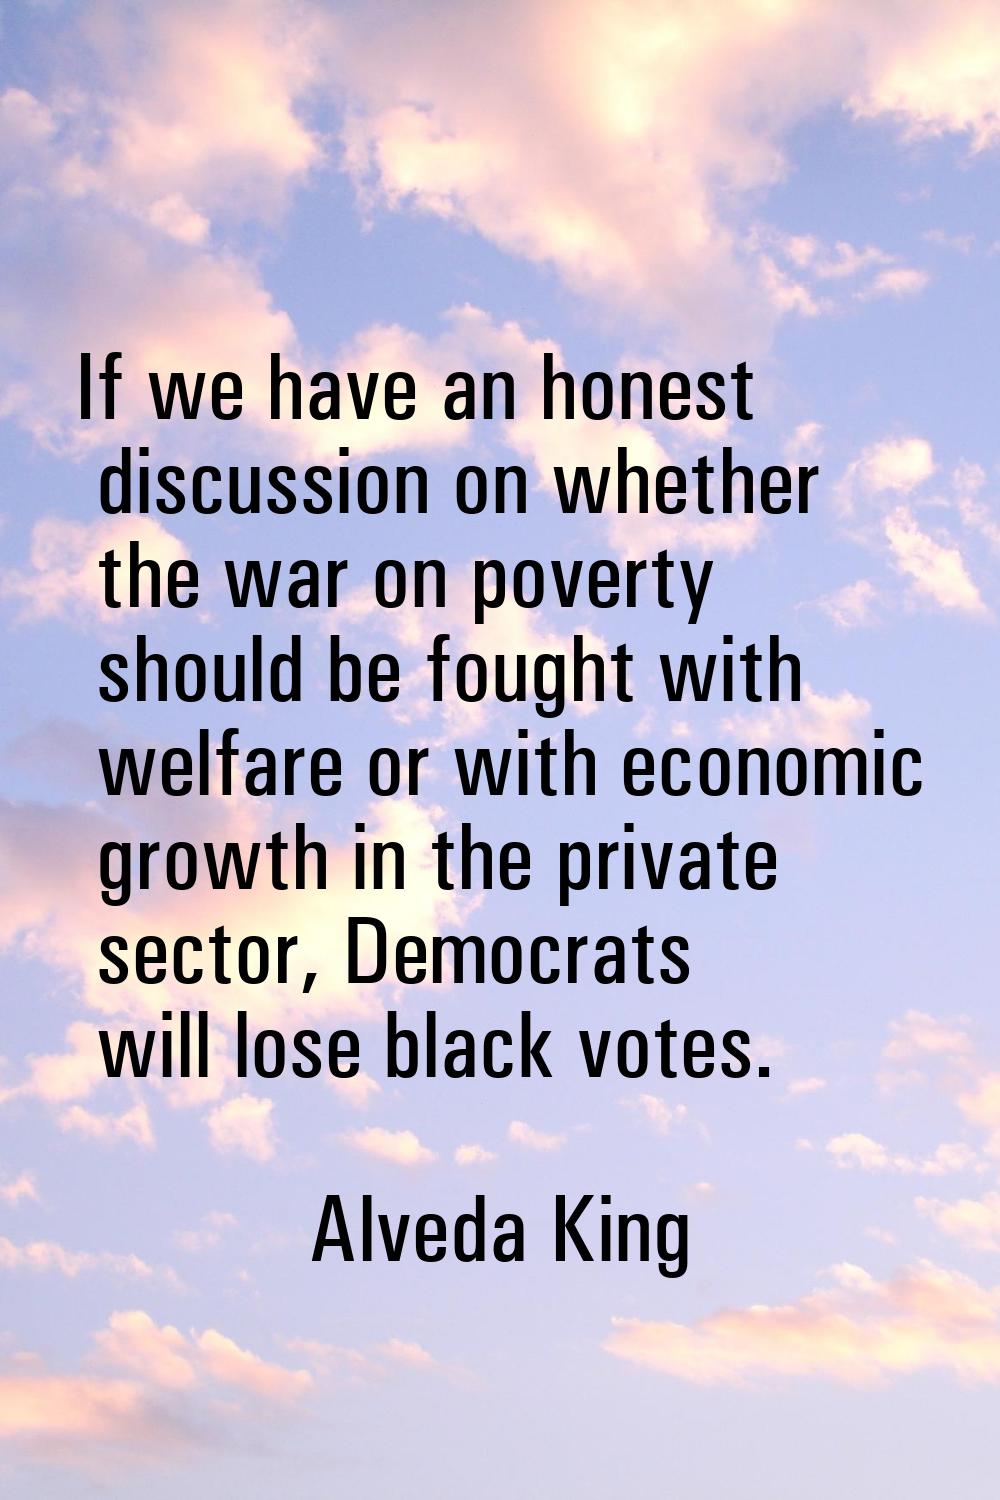 If we have an honest discussion on whether the war on poverty should be fought with welfare or with